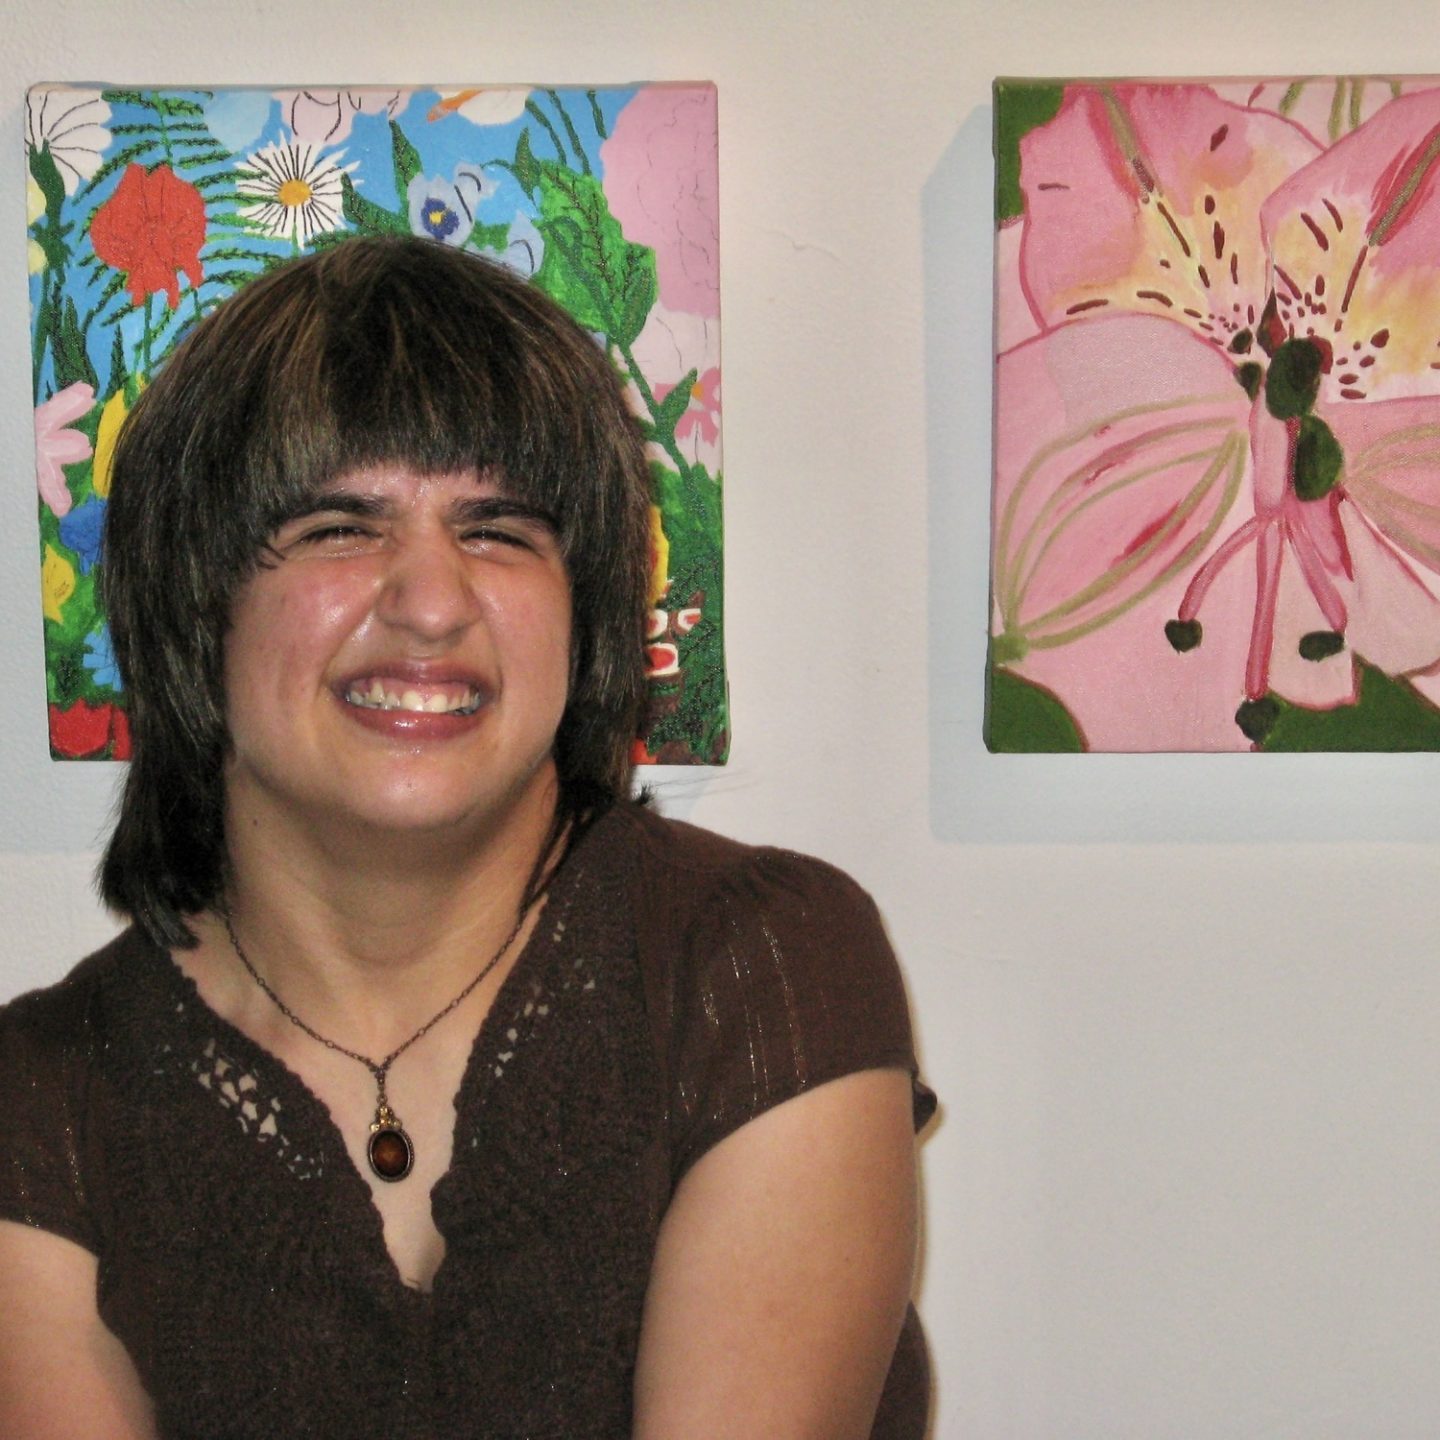 An artist smiles in front of a wall where their artwork is hung.